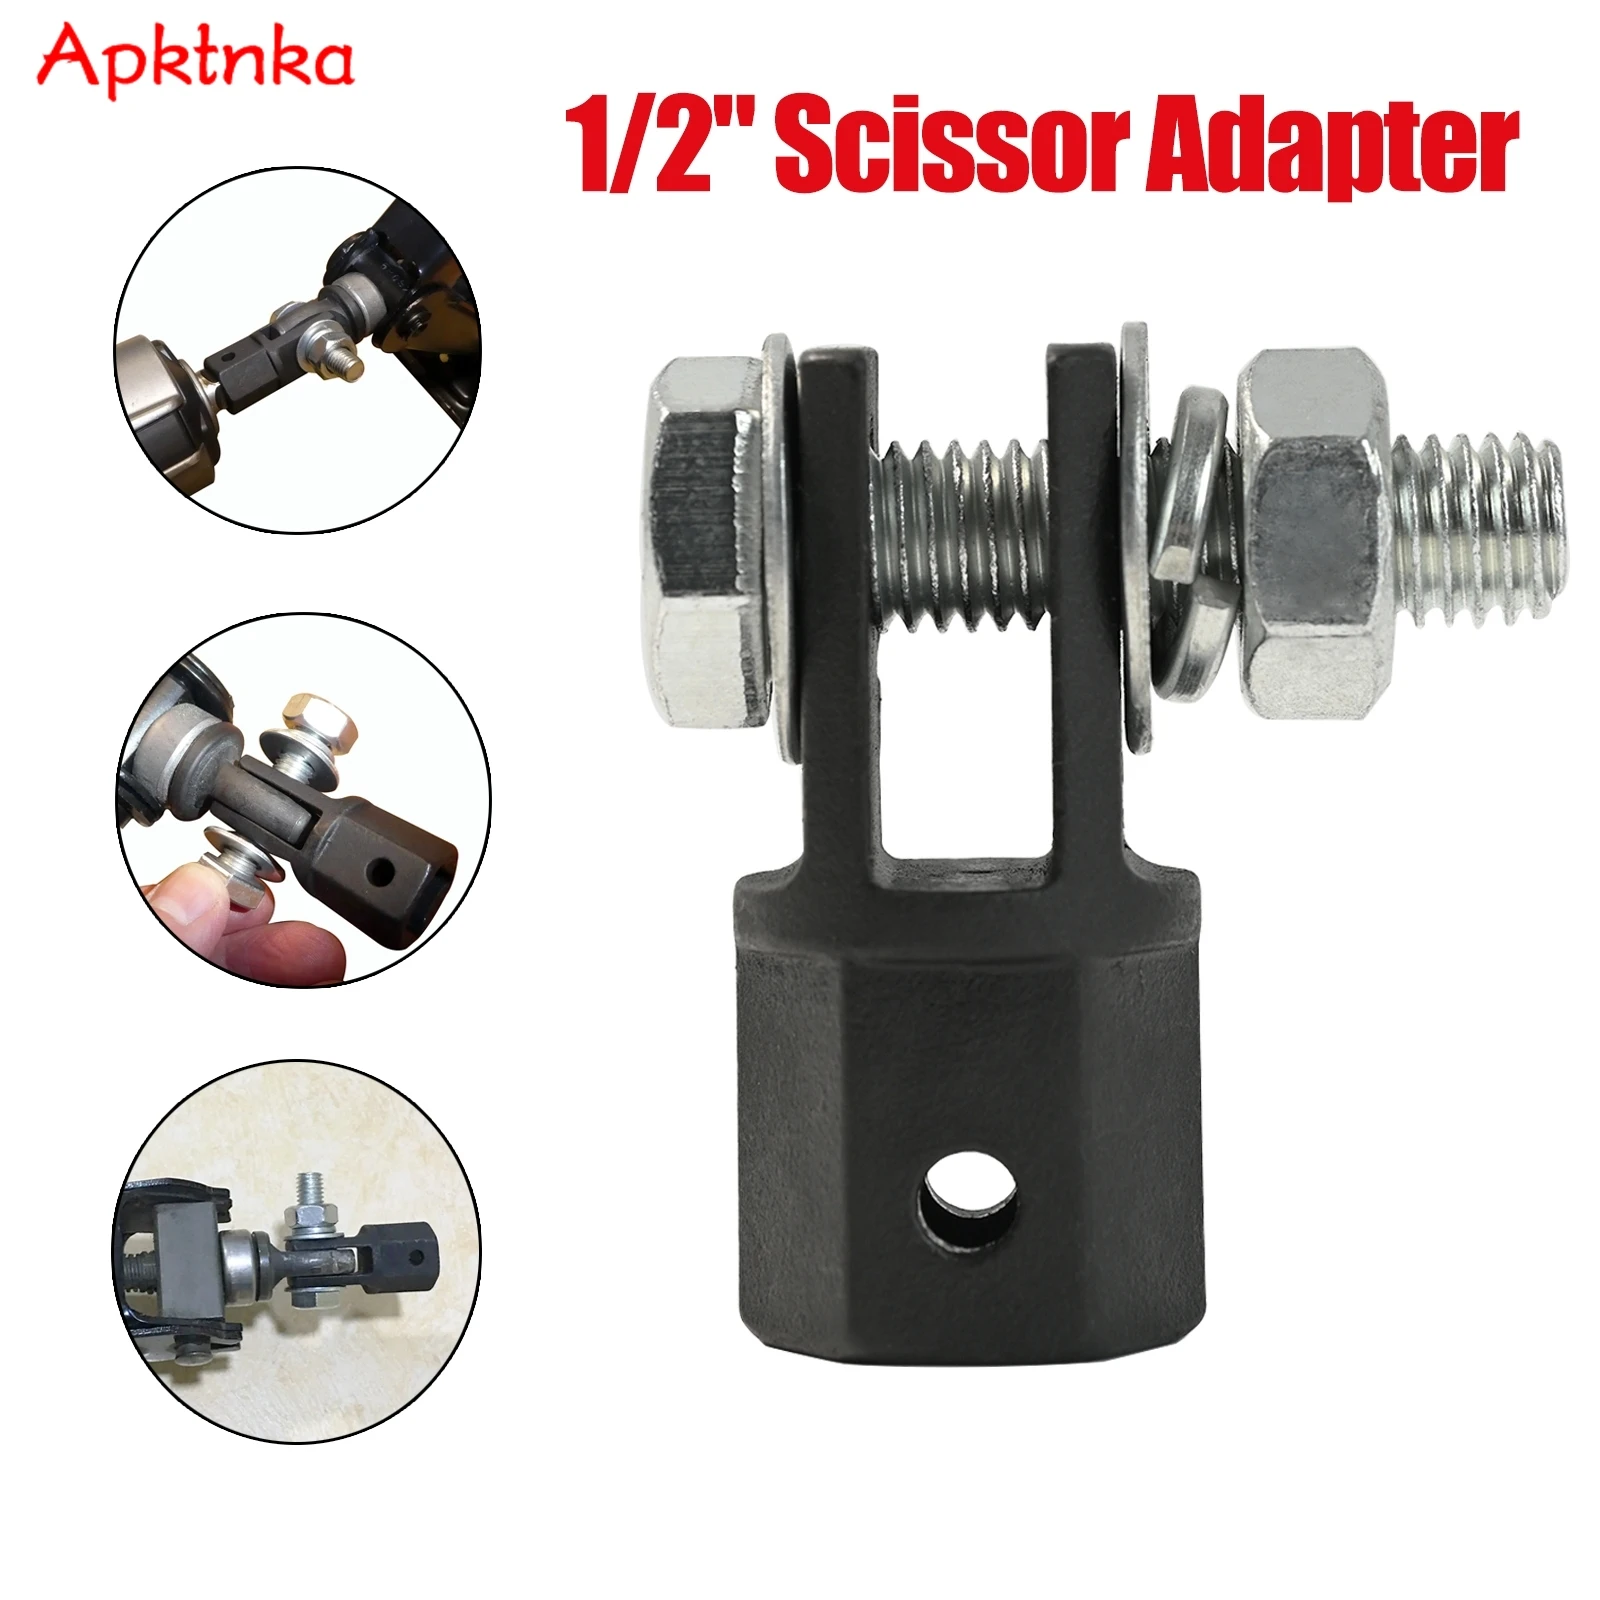 

1PC 1/2" Scissor Adapter For Use With 1/2in Drive Impact Wrench Jack Adapter Chrome Vanadium Steel Repair Tool Car Accessories